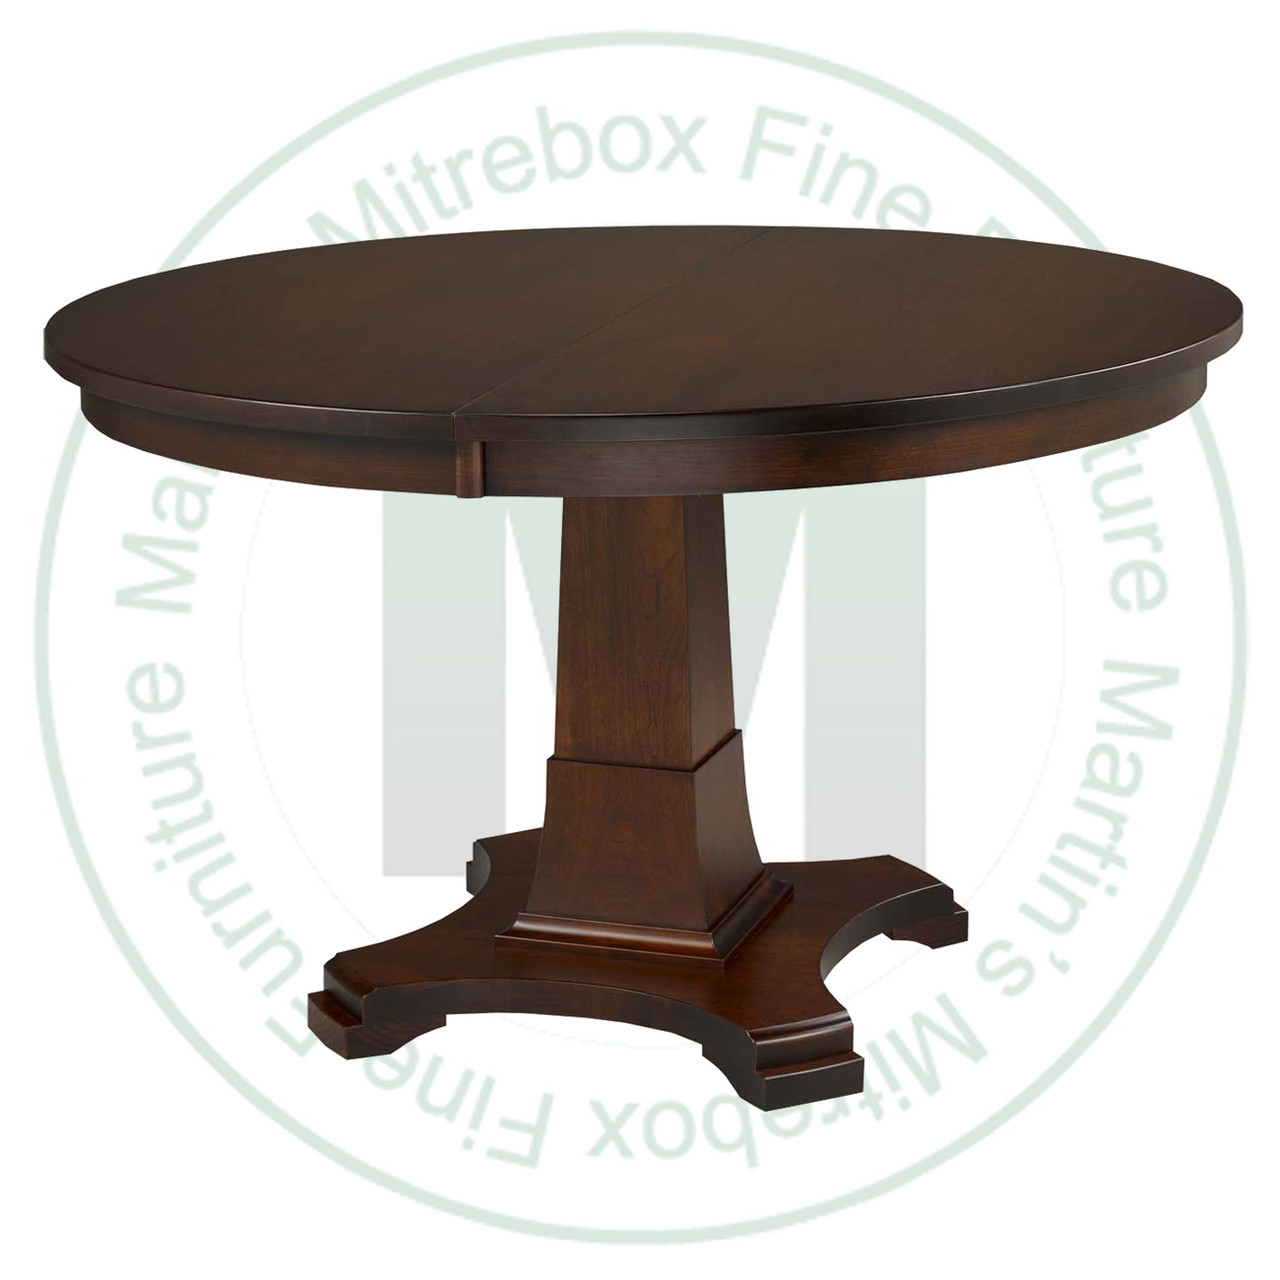 Wormy Maple Abbey Single Pedestal Table 36''D x 48''W x 30''H  Round Solid Table. Table Has 1.25'' Thick Top